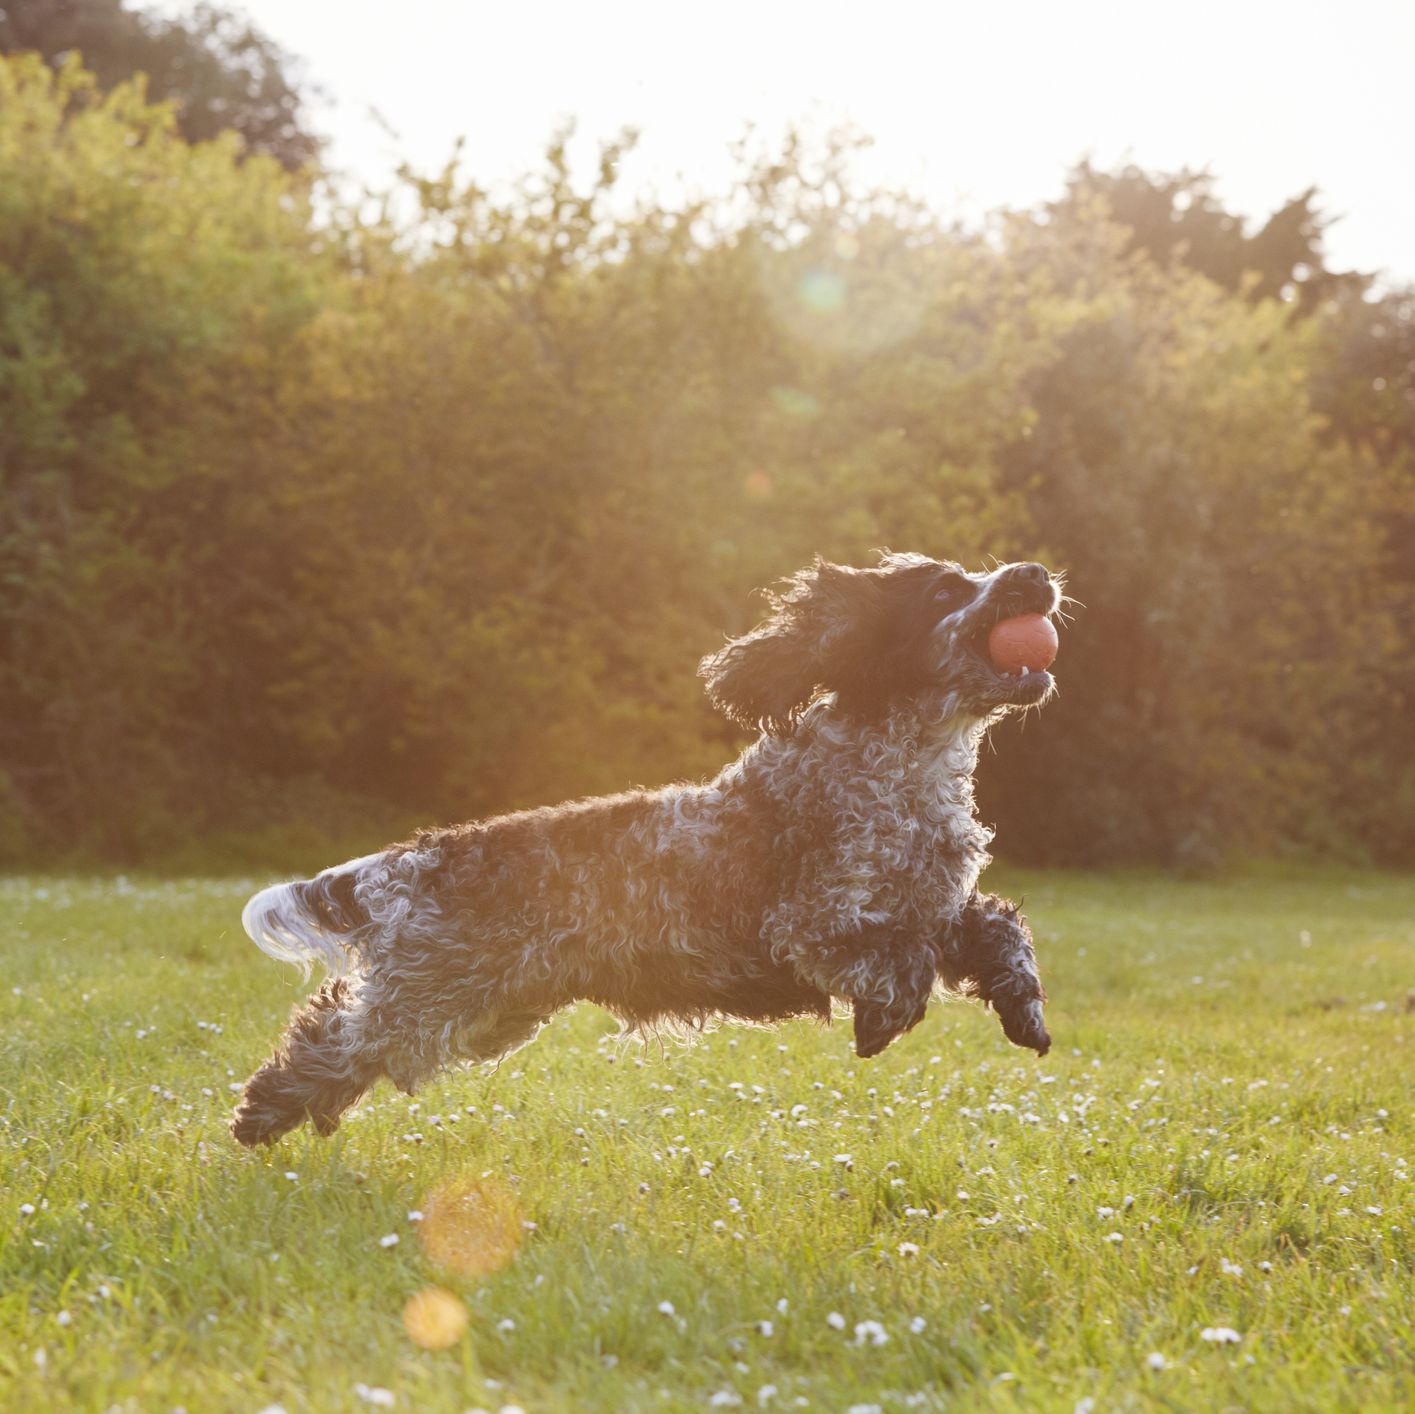 6 ways to protect your dogs from skin cancer in the sun